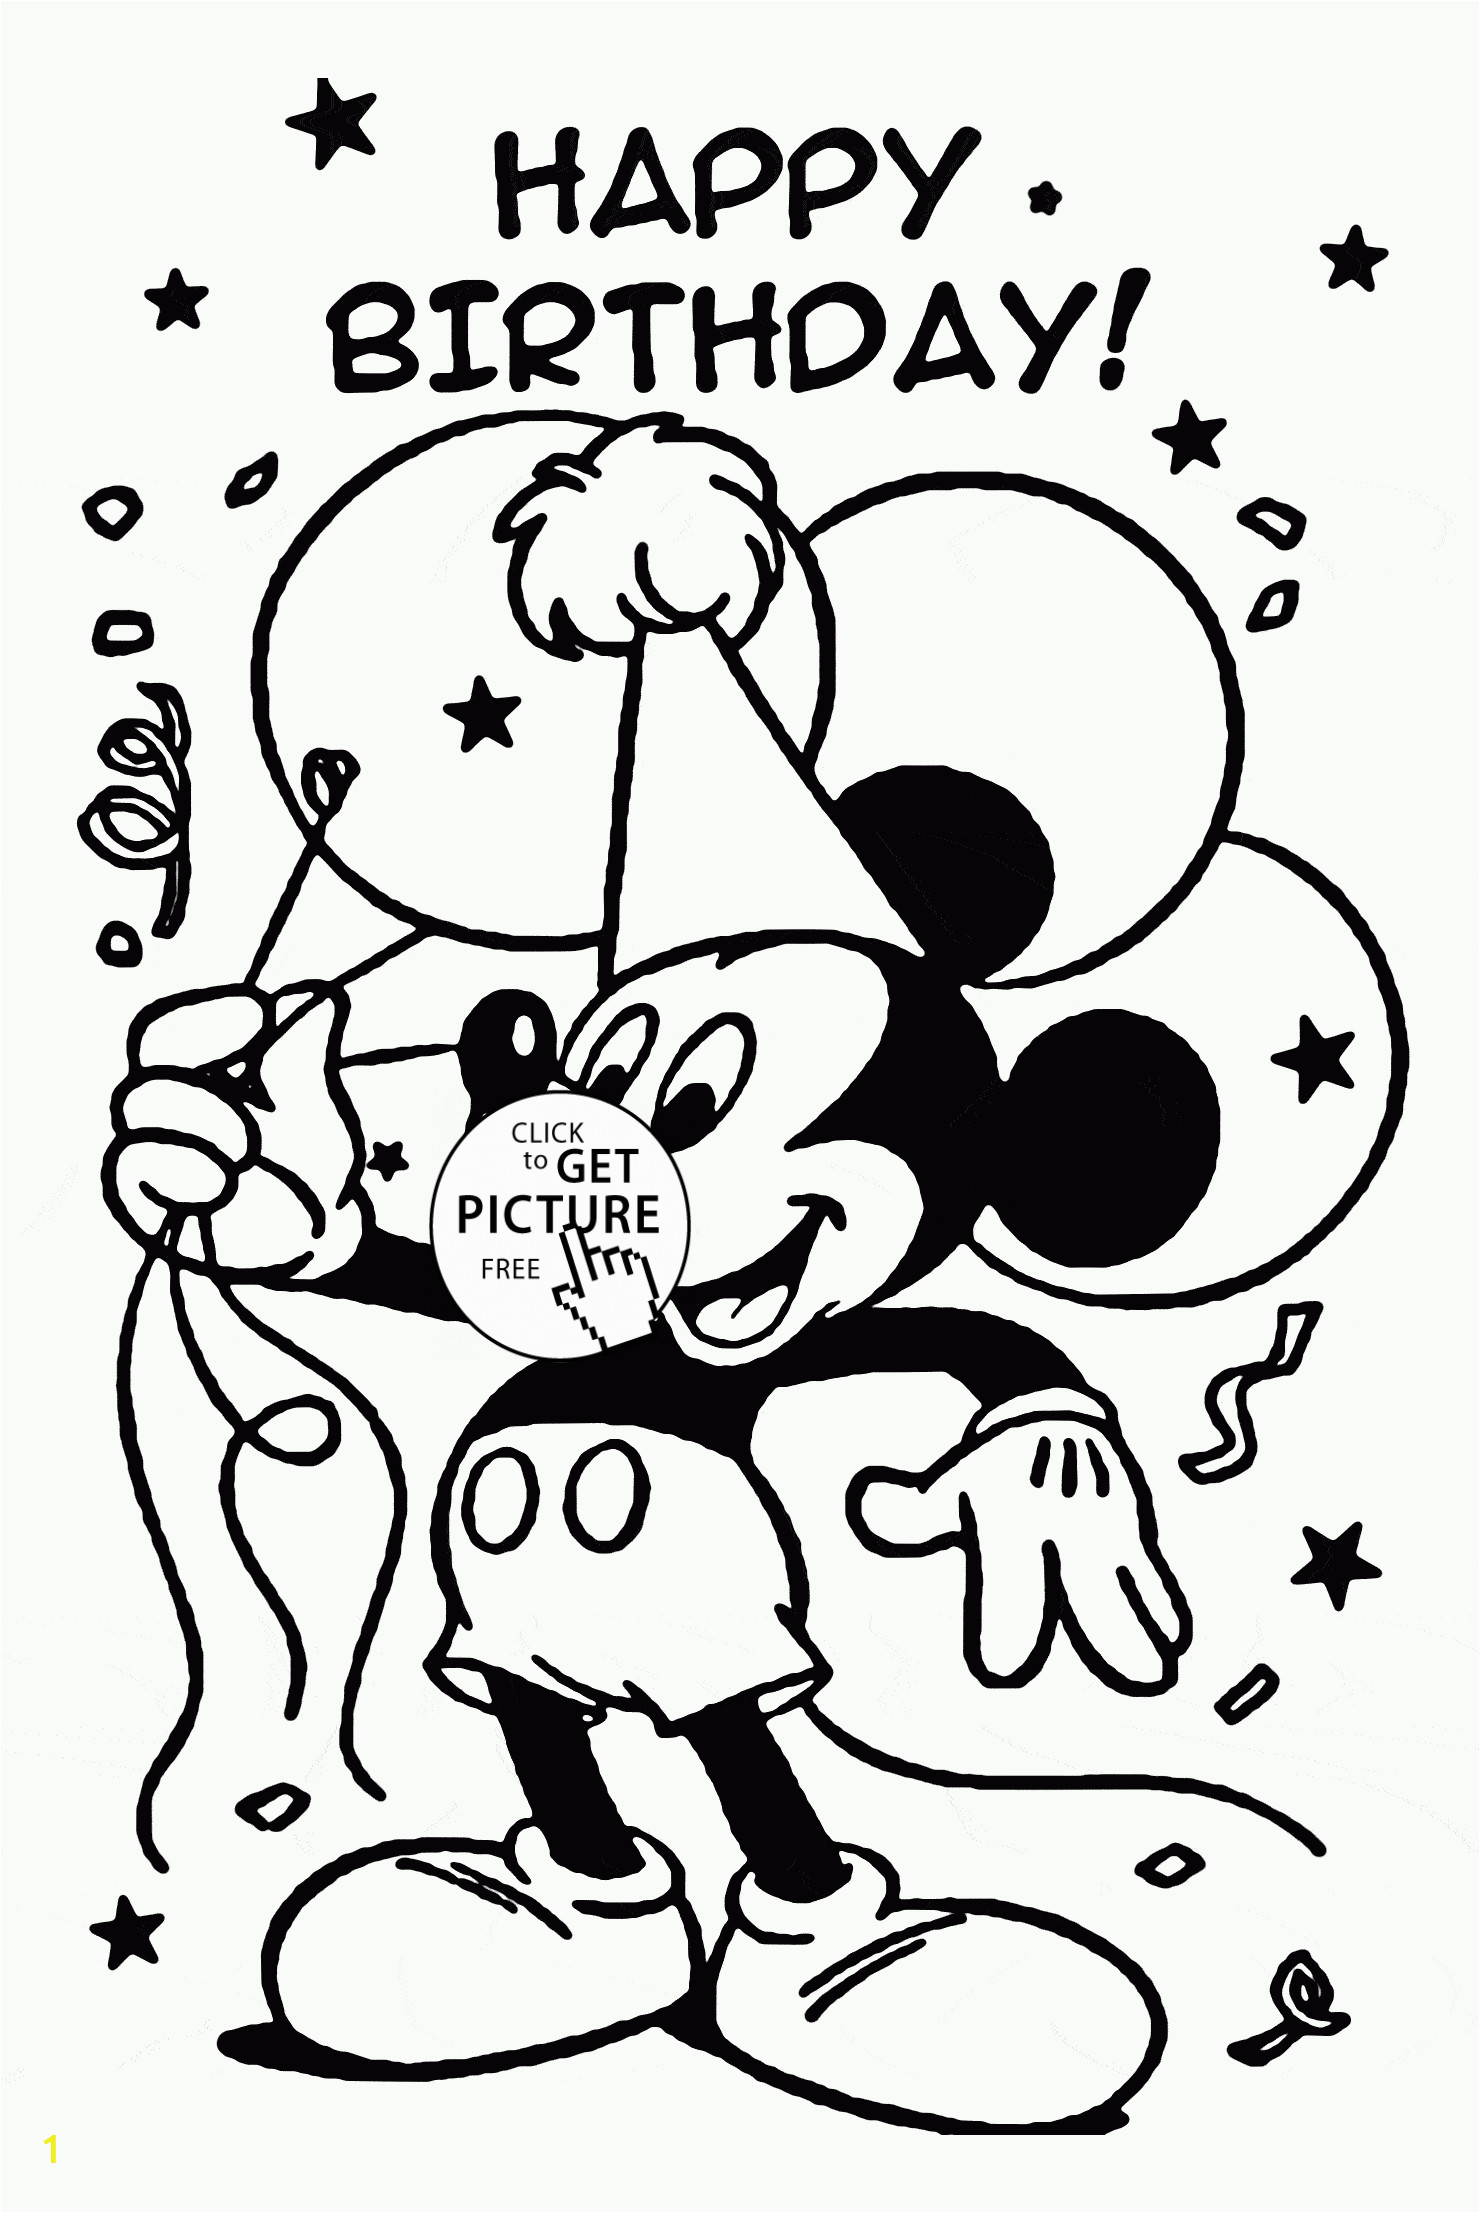 Happy Birthday Mickey Mouse Coloring Pages Mickey and Happy Birthday Coloring Page for Kids Holiday